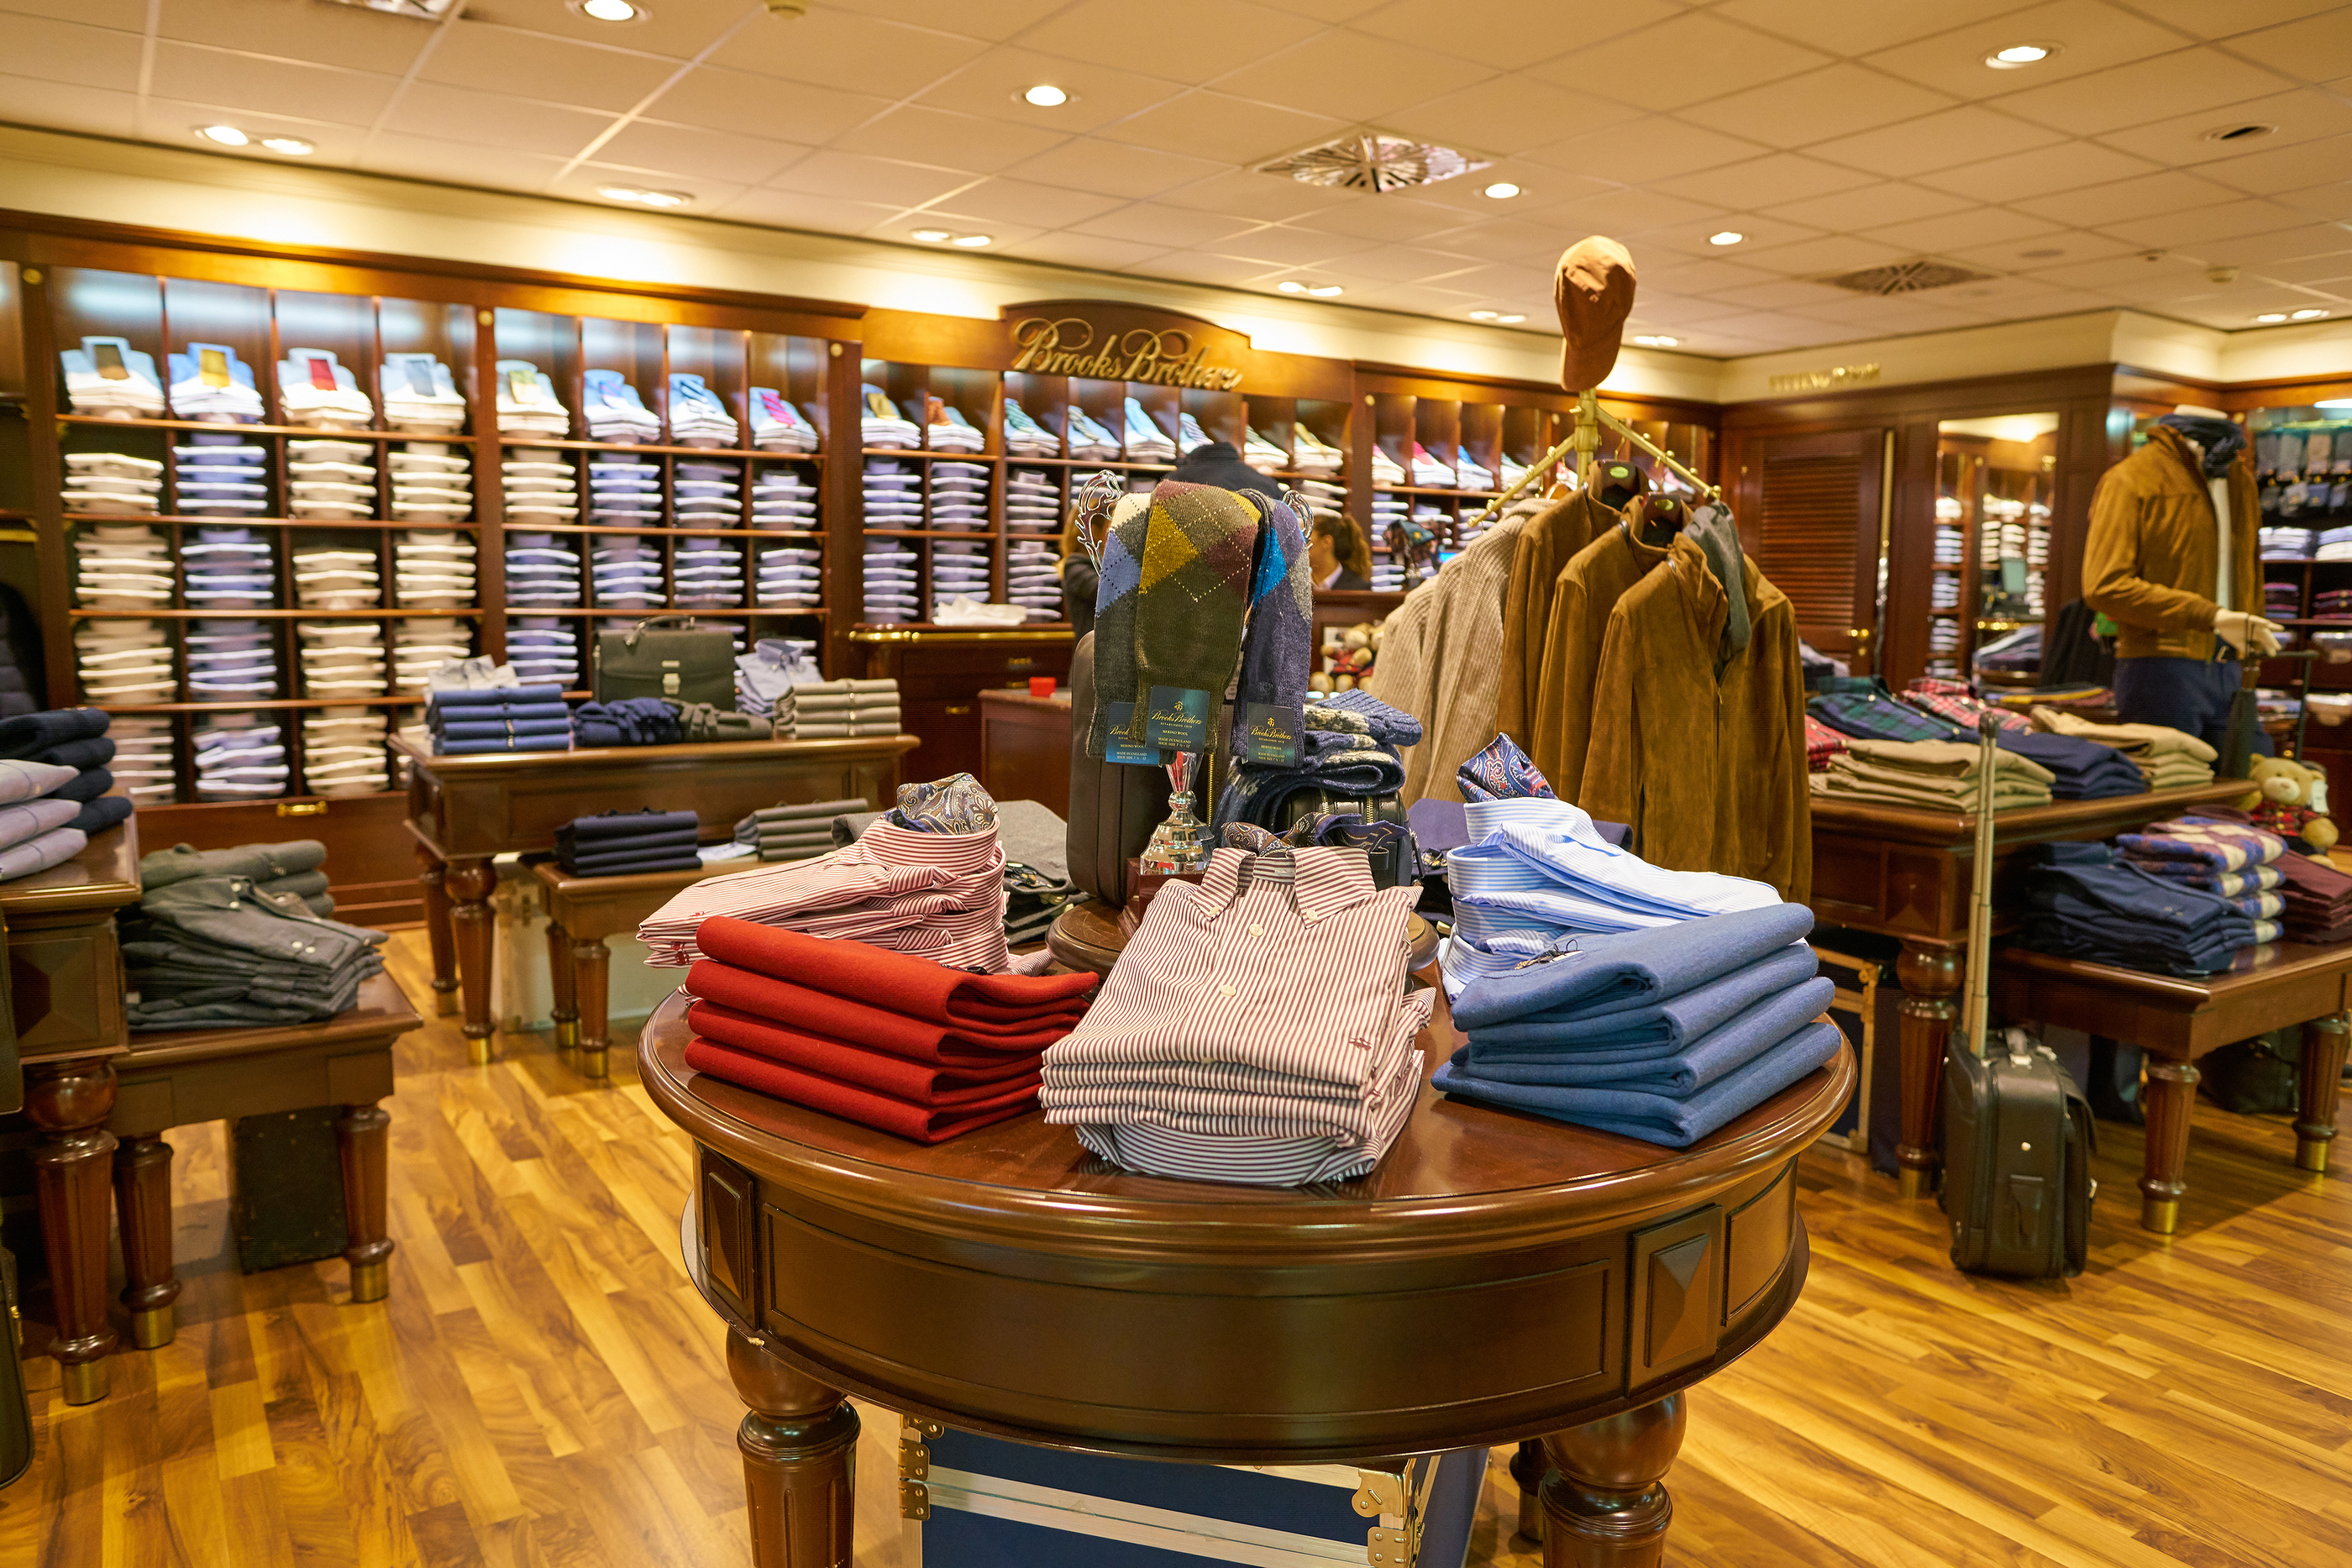 brooks brothers outlet